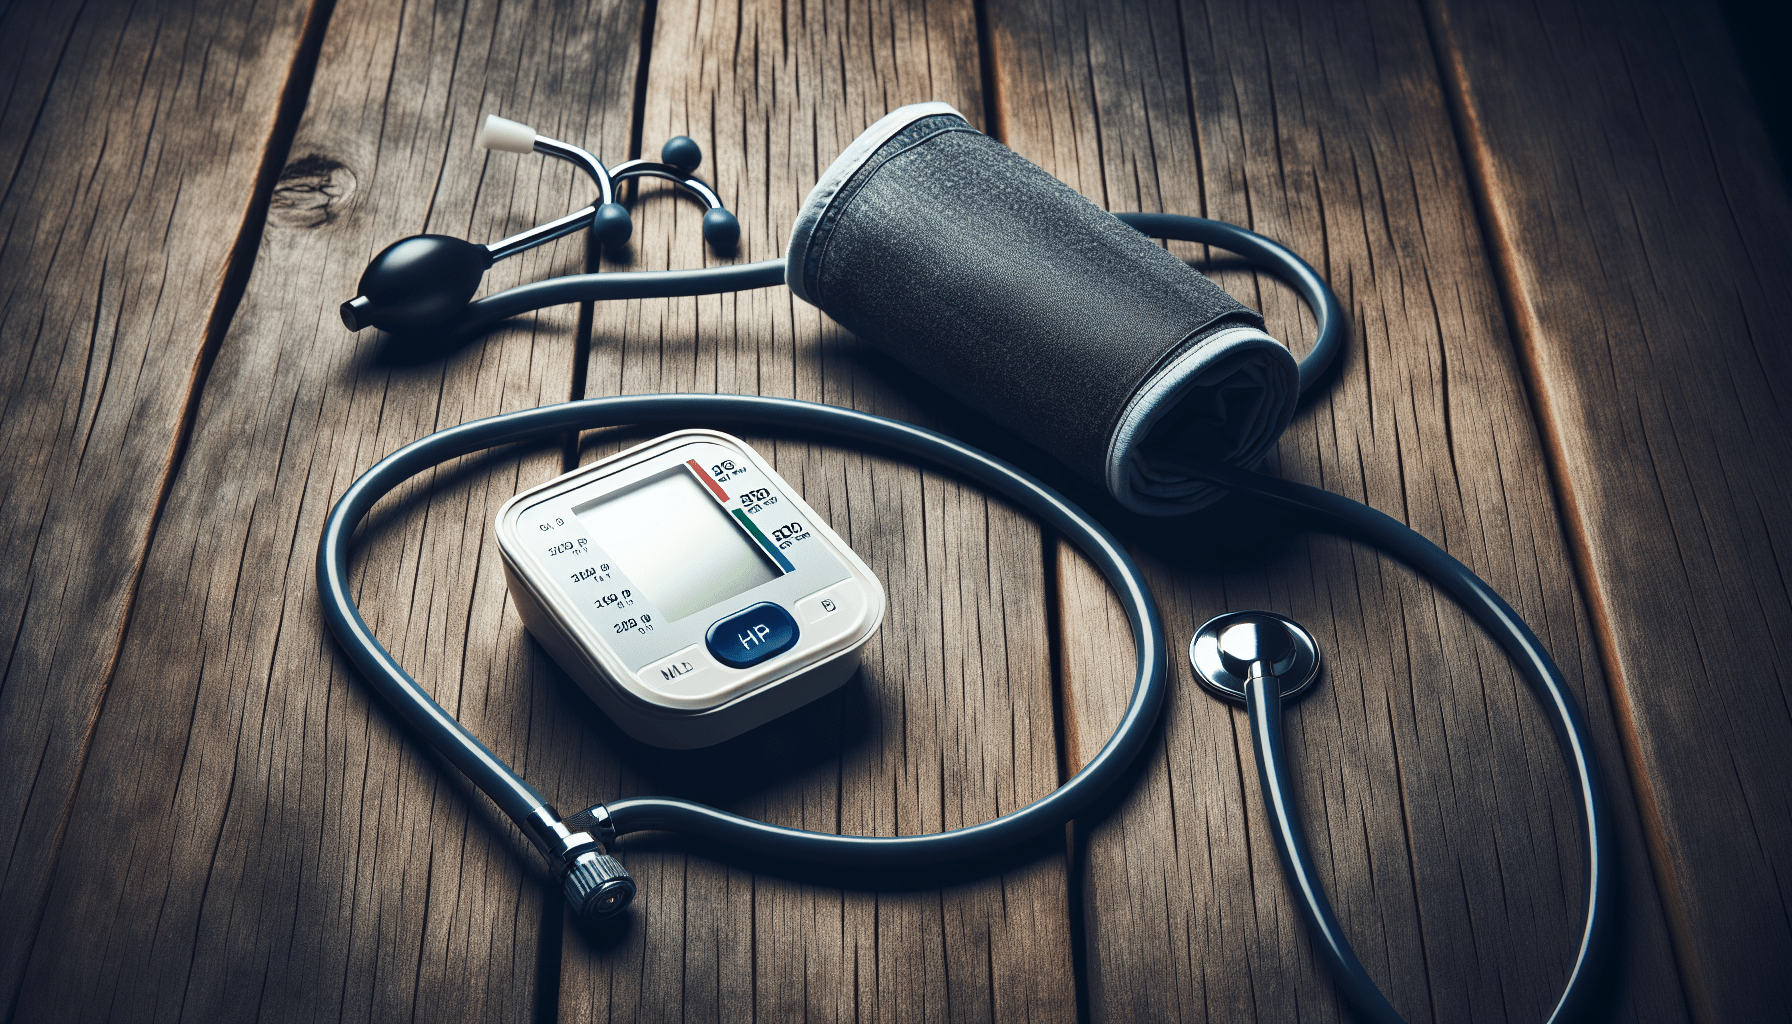 Can Blood Pressure Heal Completely?